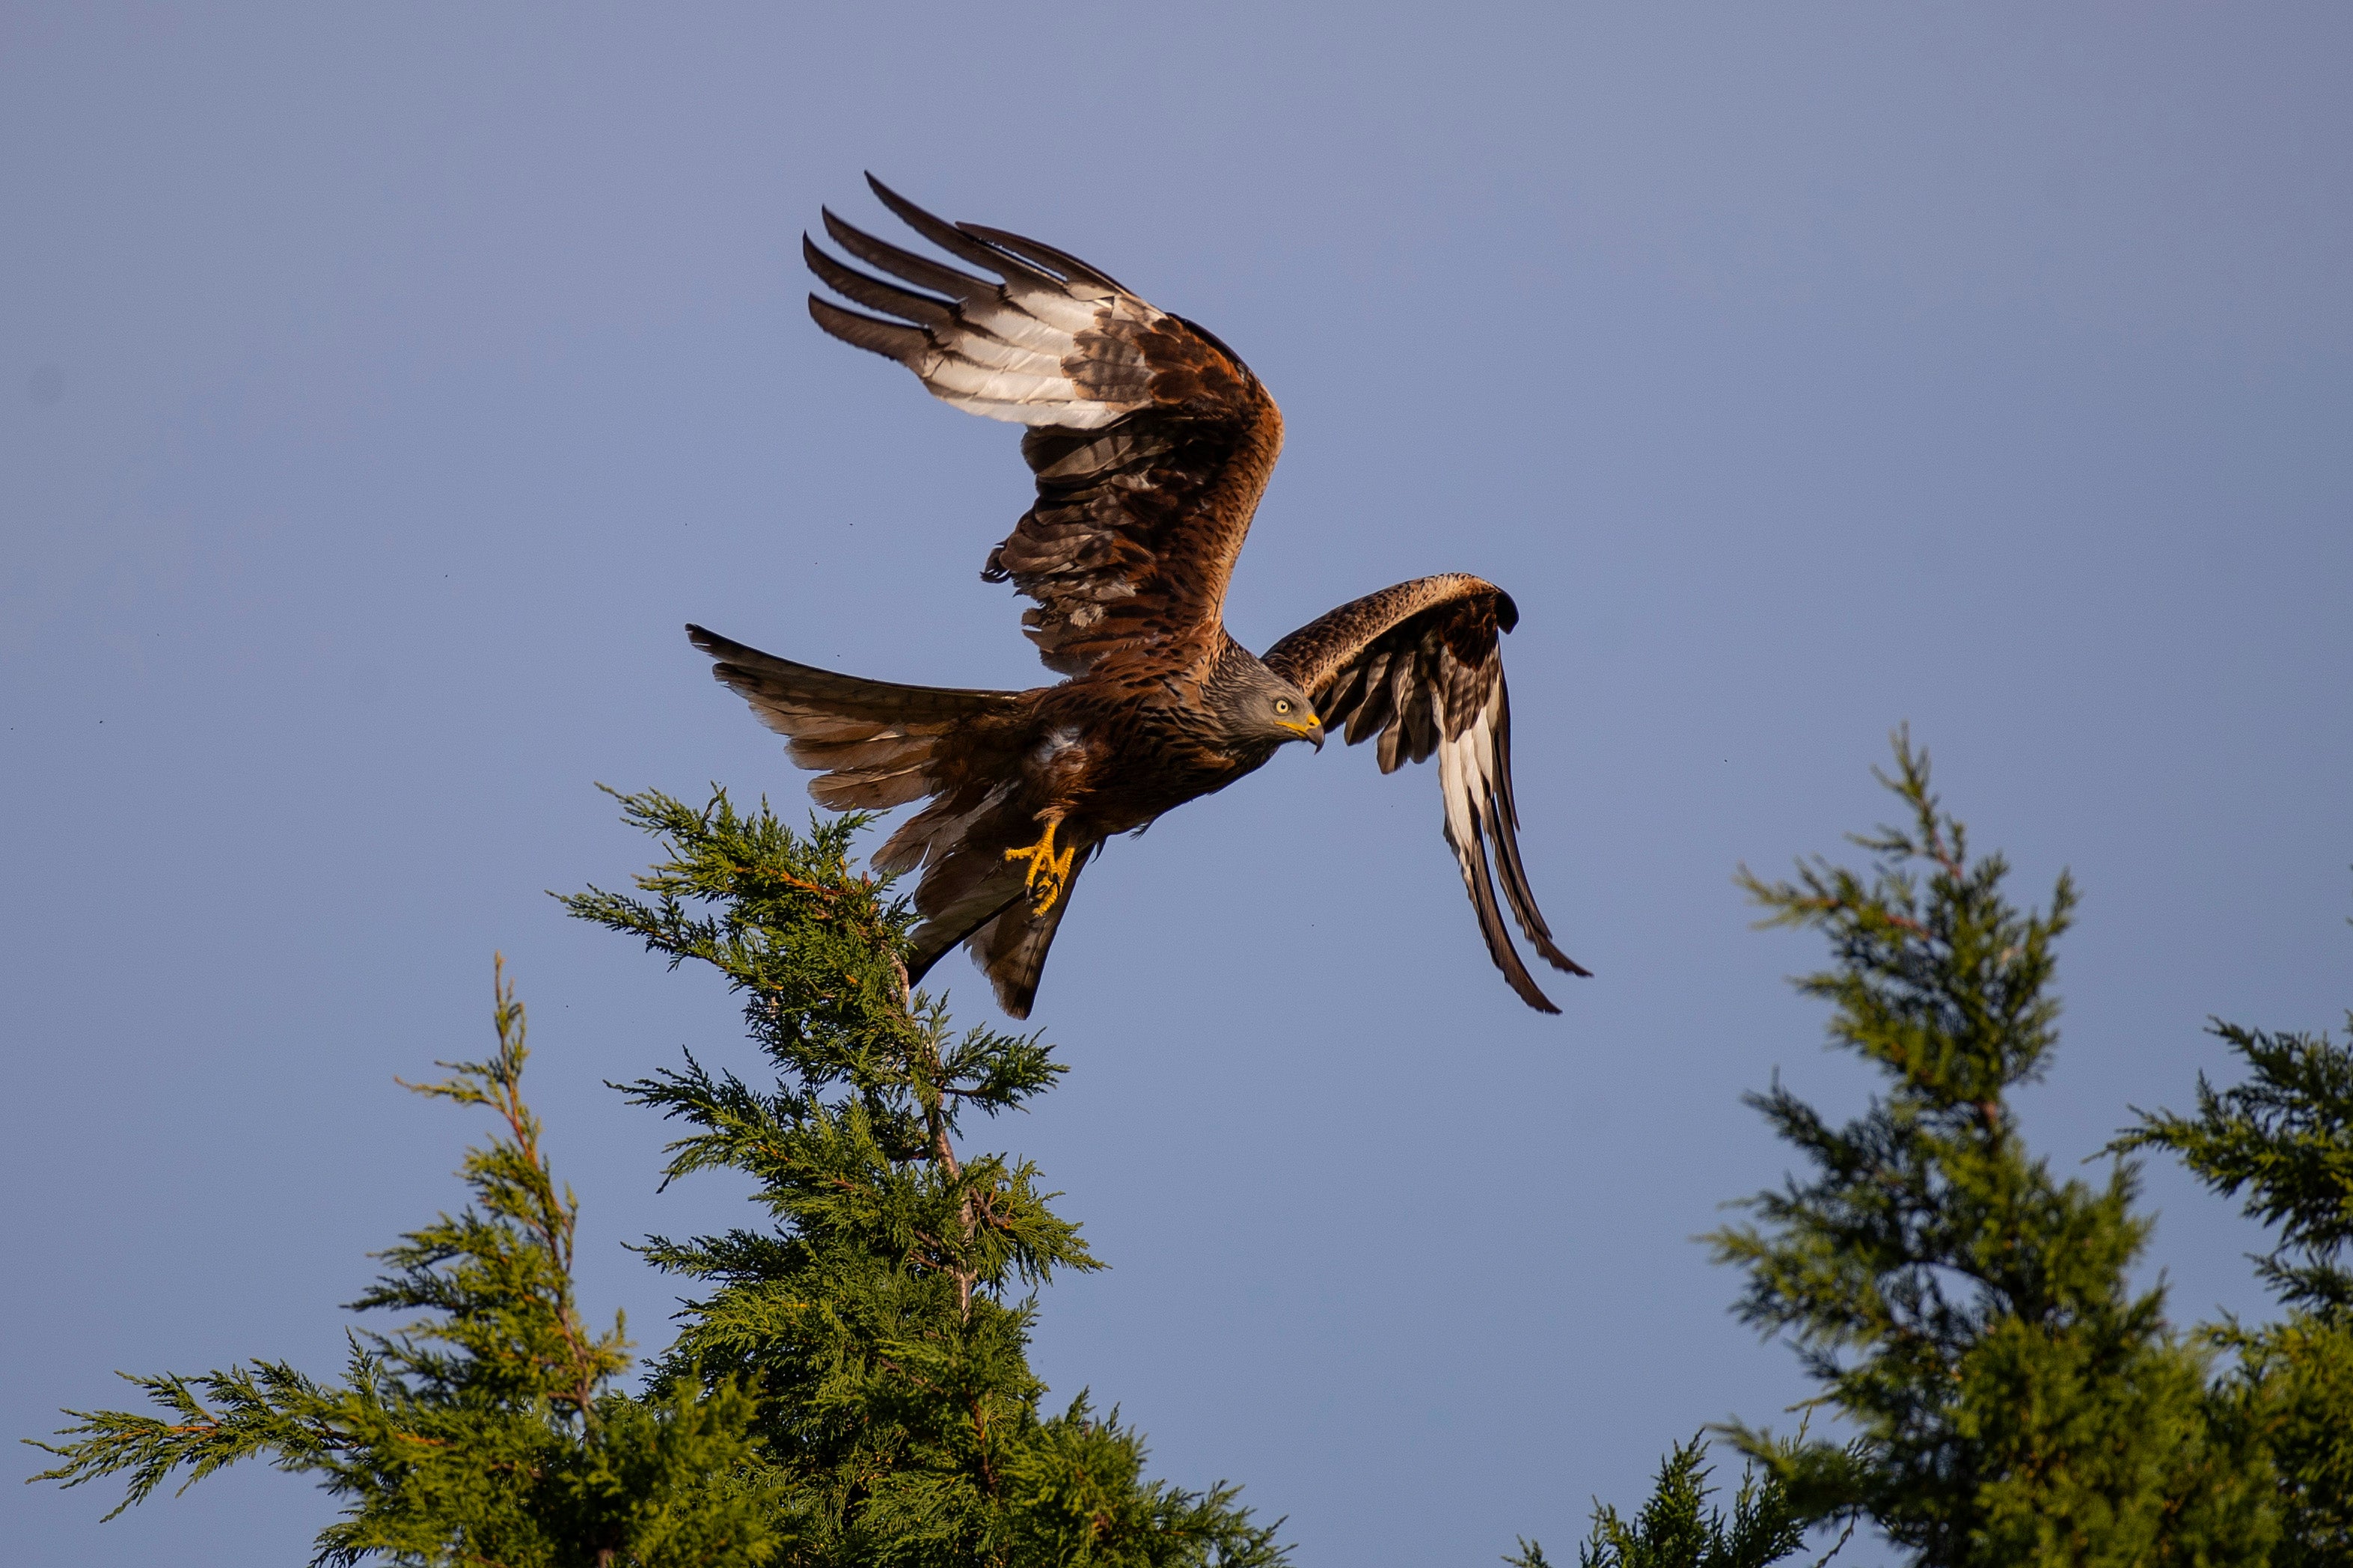 Red kites have made a triumphant comeback, with thousands of breeding pairs soaring above the UK